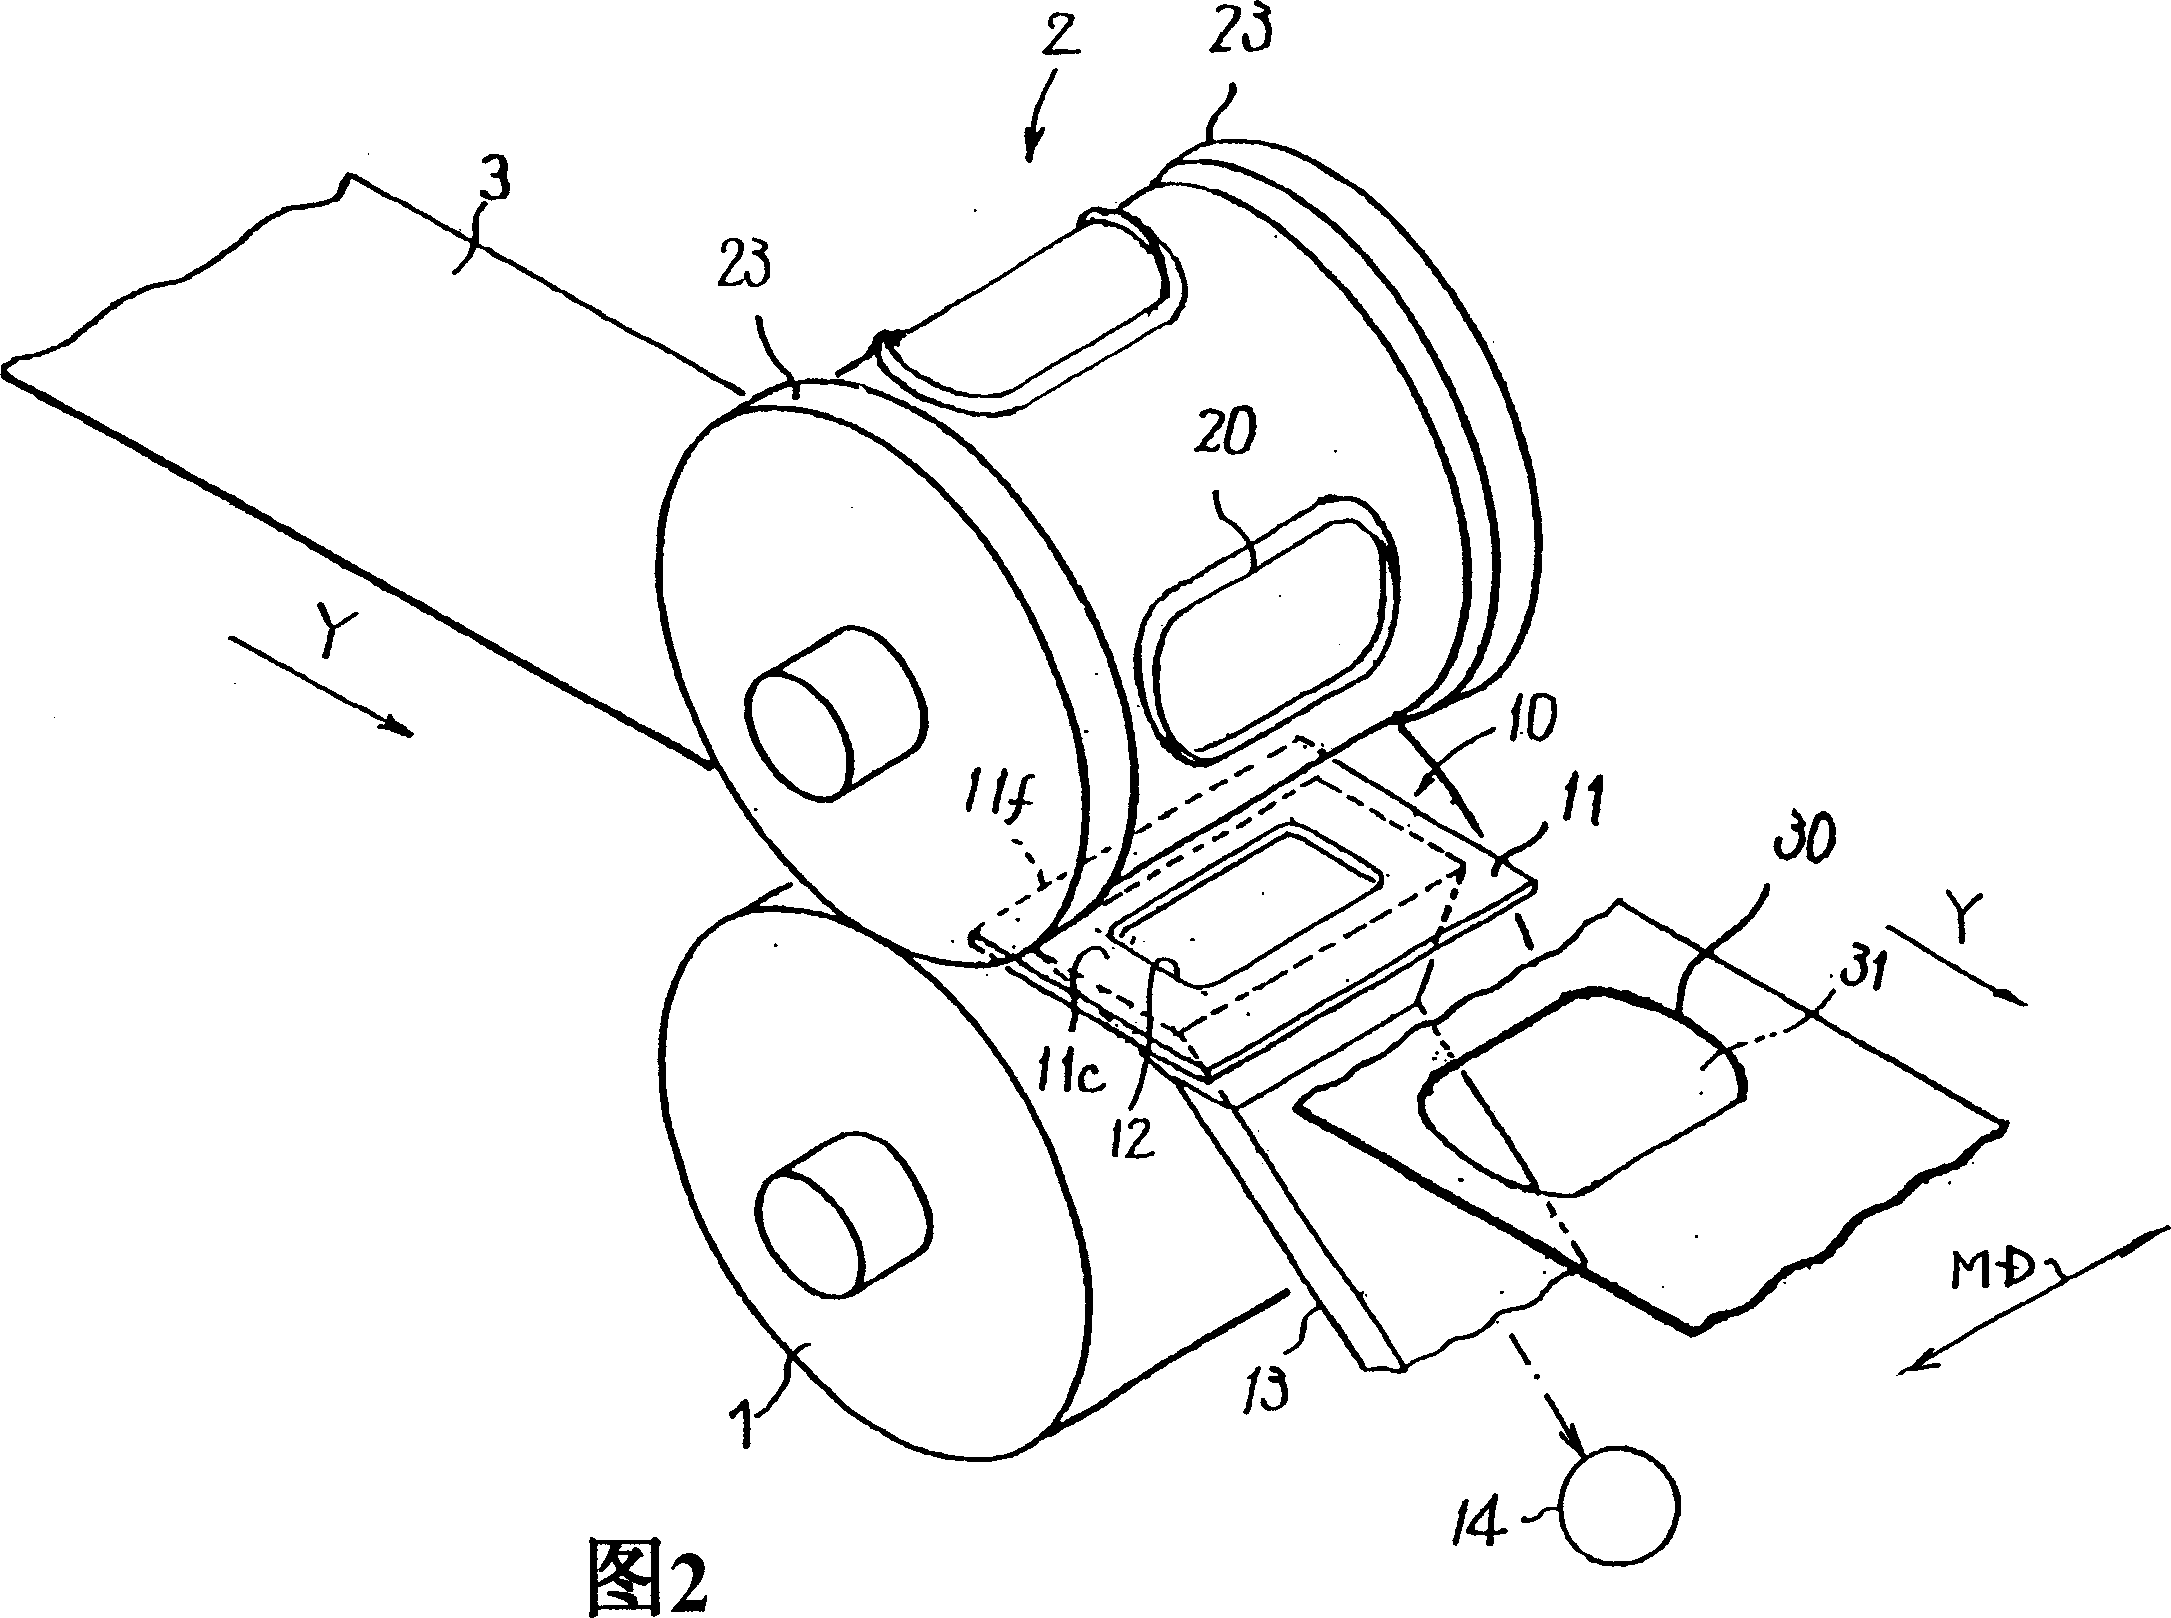 Cut-off removed device